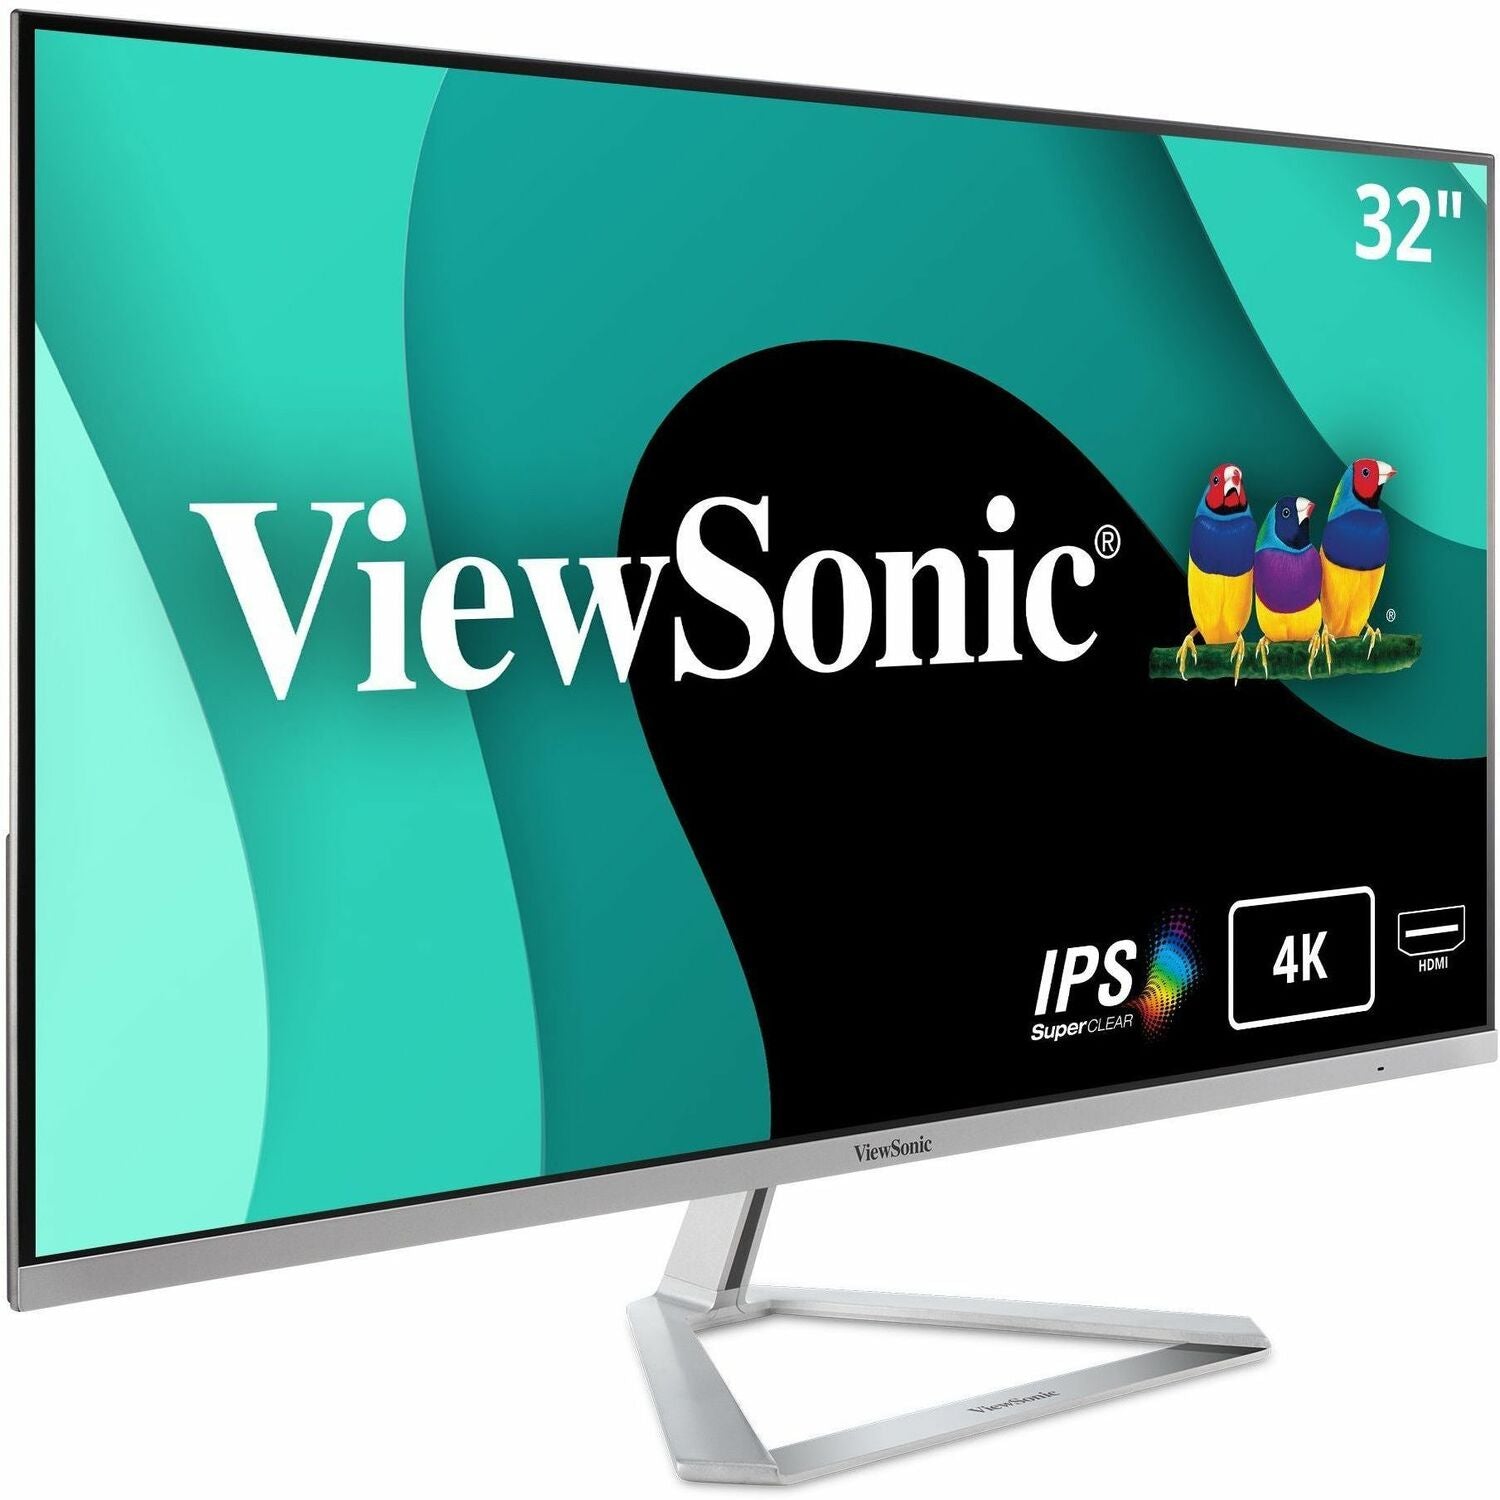 viewsonic-vx3276-4k-mhd-32-inch-4k-uhd-monitor-with-ultra-thin-bezels-hdr10-hdmi-and-displayport-for-home-and-office-vx3276-4k-mhd-4k-uhd-monitor-with-ultra-thin-bezels-hdr10-hdmi-and-displayport-300-cd-m2-32_vewvx32764kmhd - 1